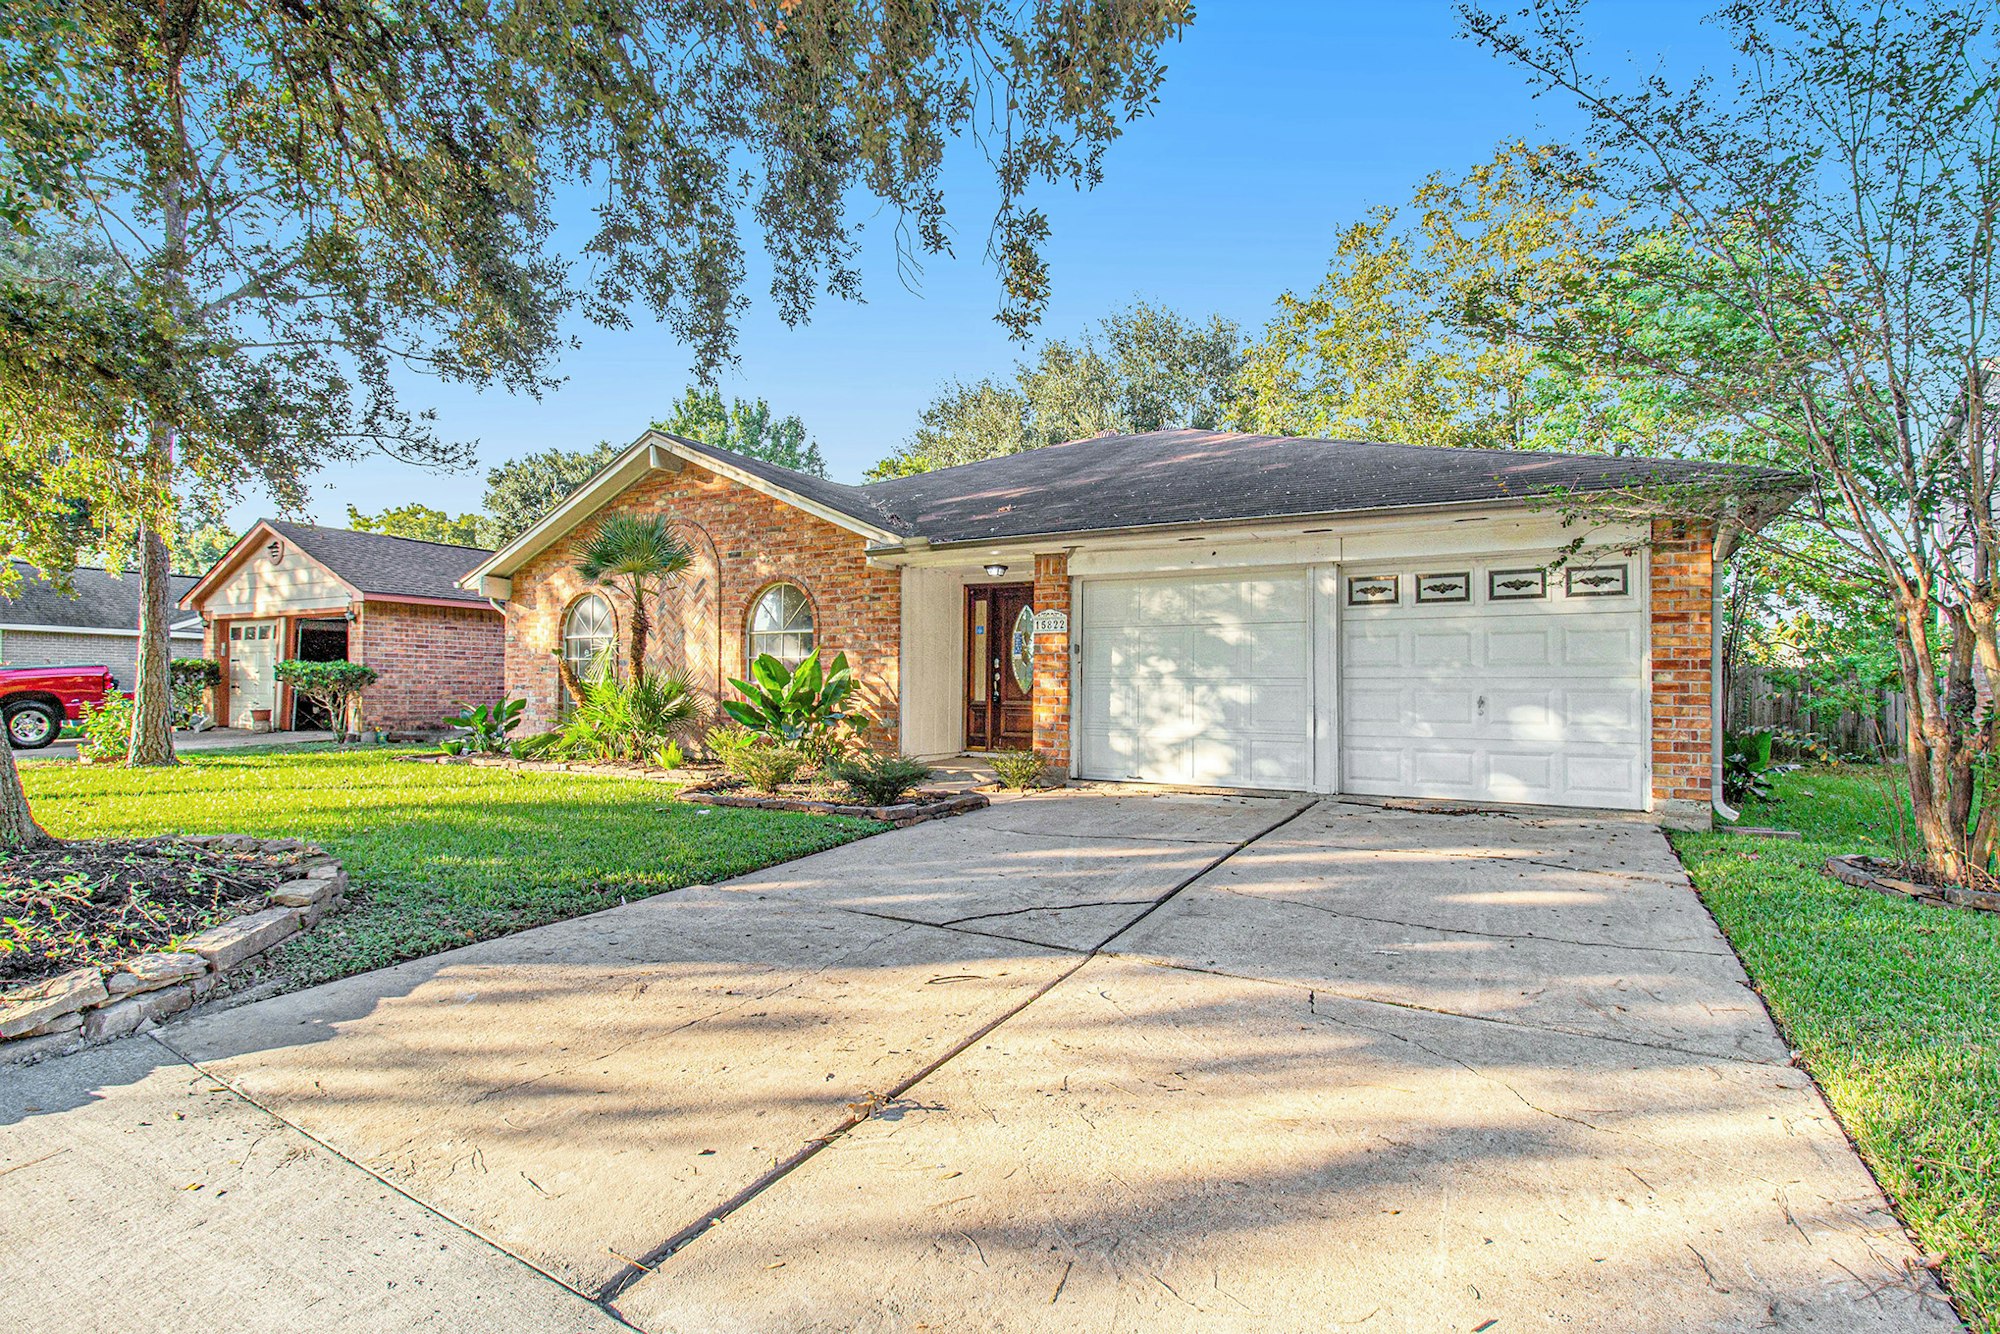 Photo 1 of 17 - 15822 Manfield Dr, Houston, TX 77082